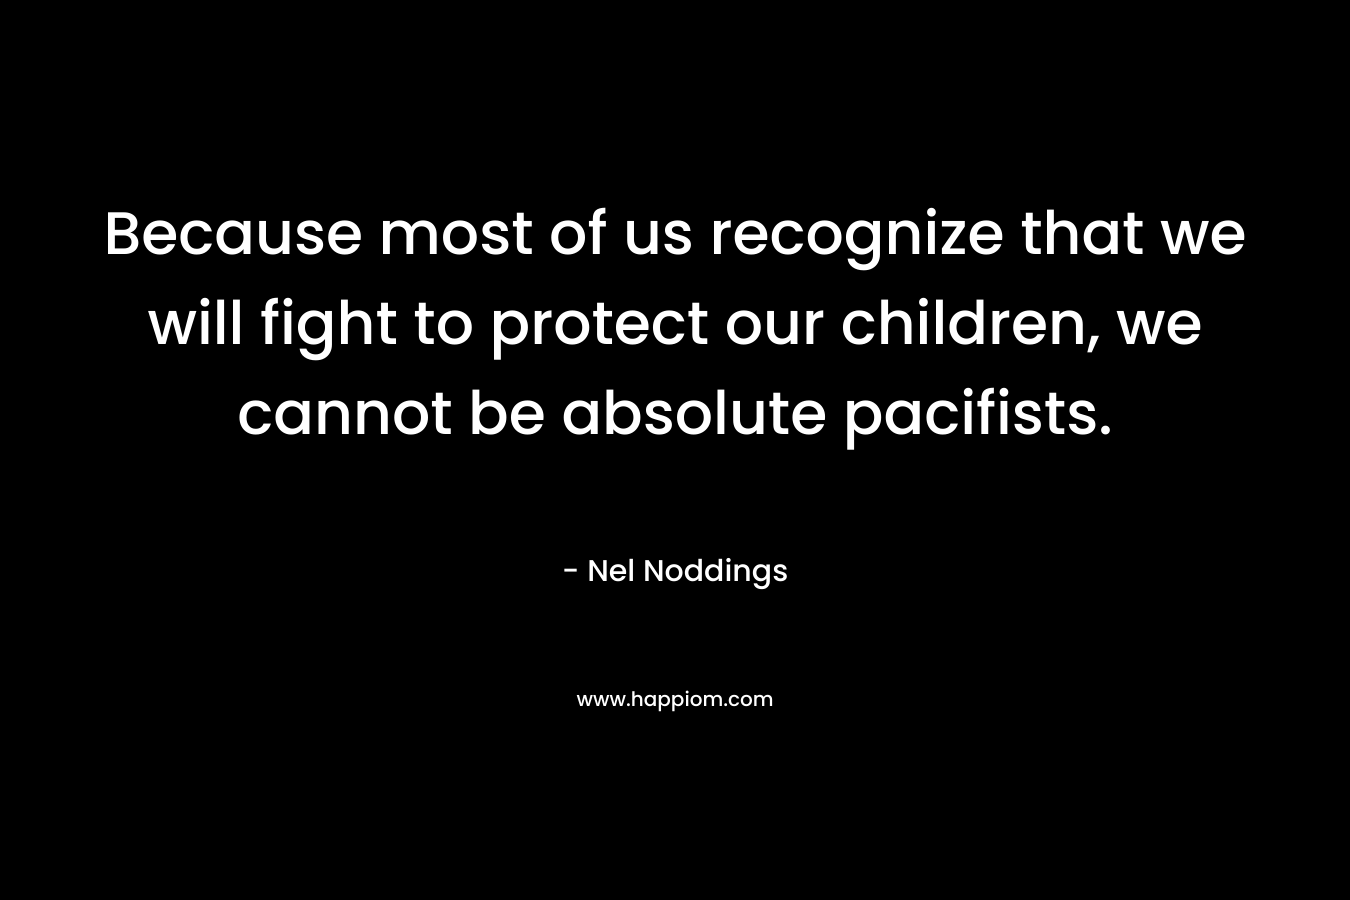 Because most of us recognize that we will fight to protect our children, we cannot be absolute pacifists.